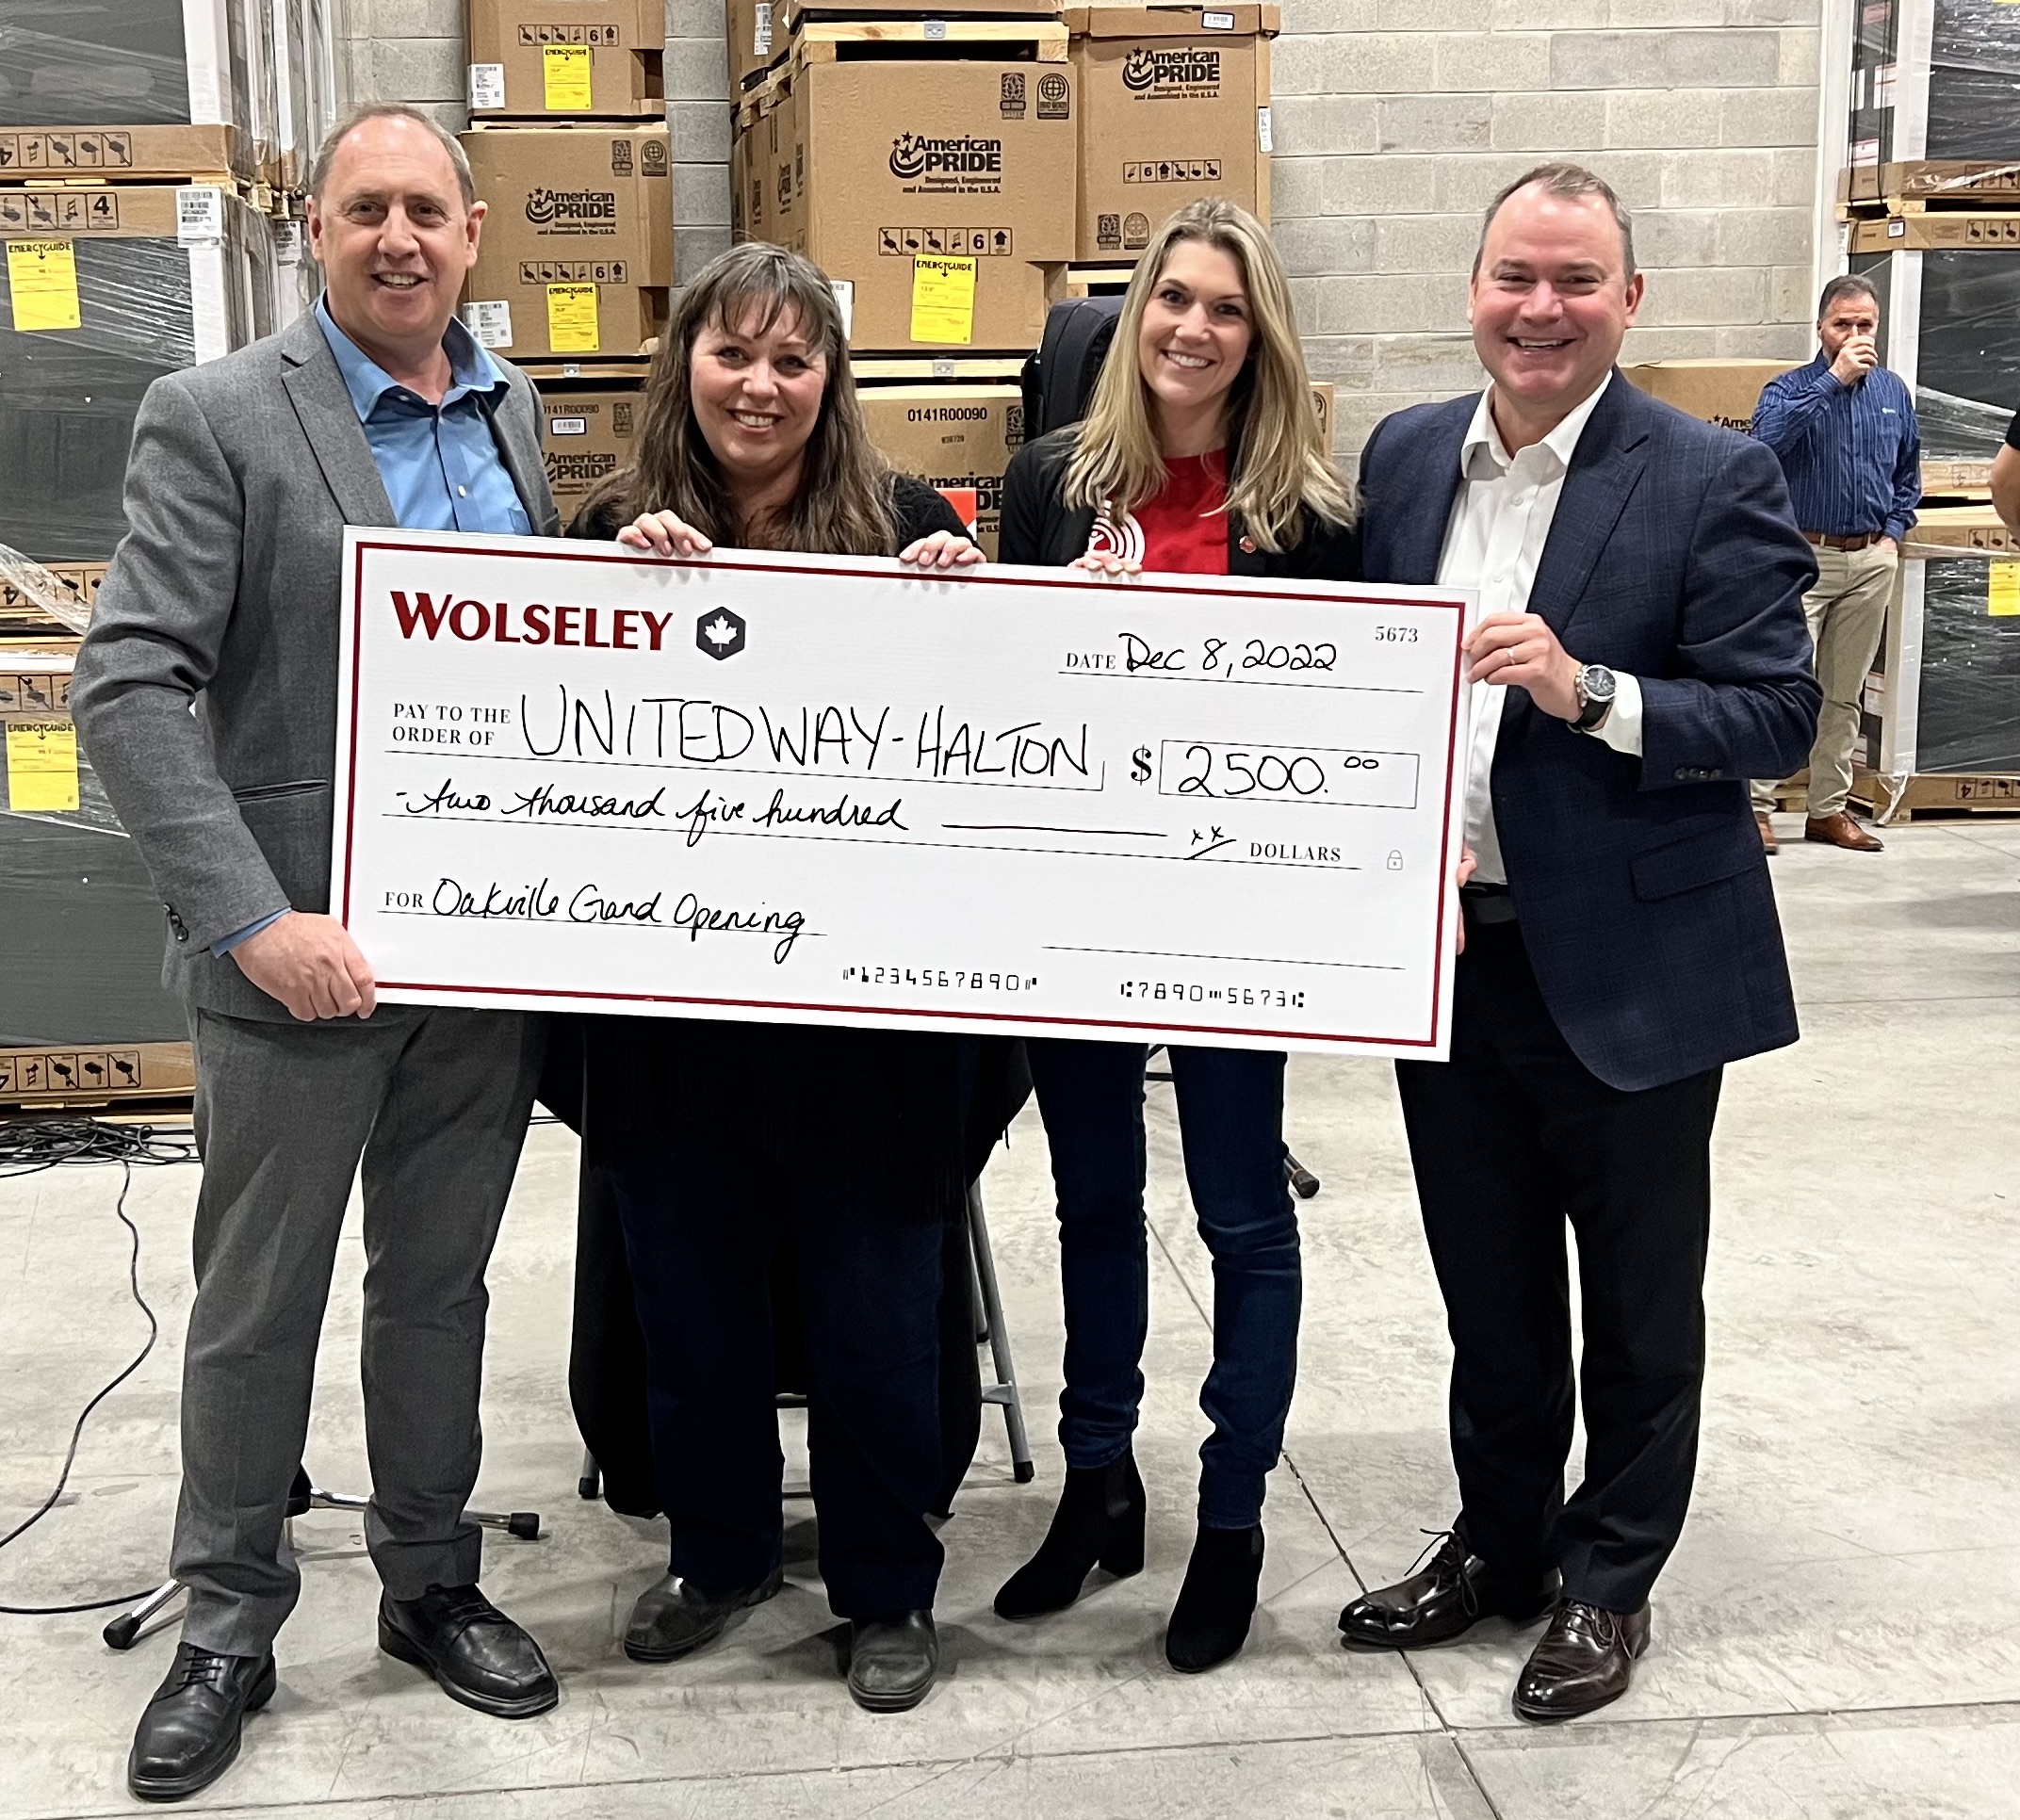 As a sign of community commitment, Wolseley presented a $2,500 donation to the United Way of Halton Hamilton. | Oakville News N.M.